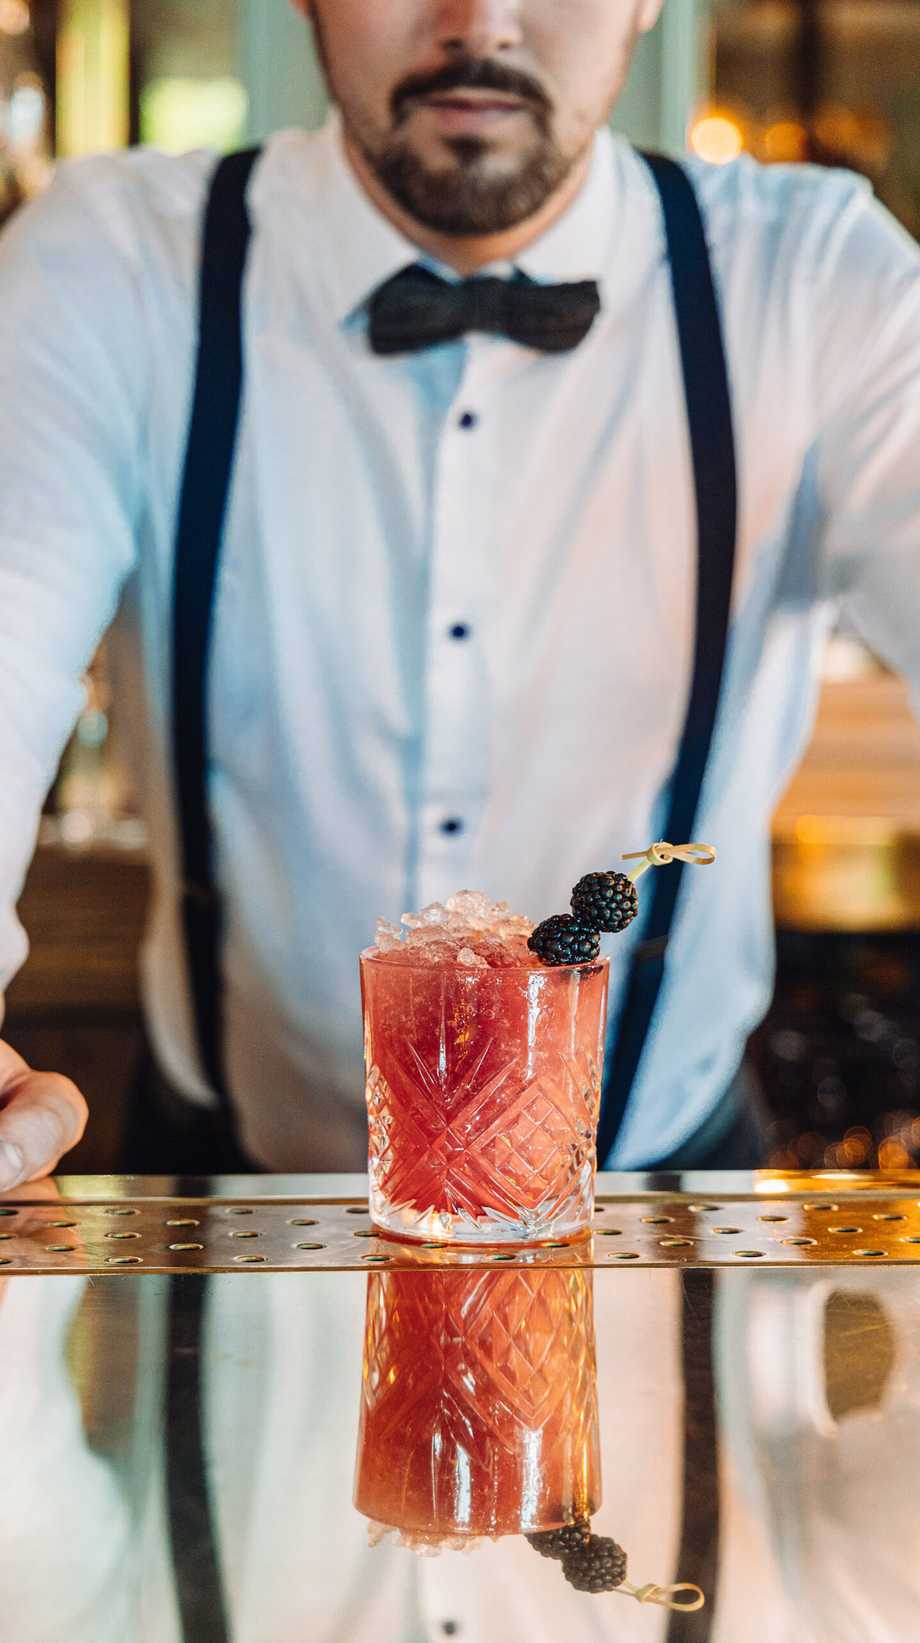 A mixologist wearing suspenders and a bow tie stands in front of a freshly-made cocktail.